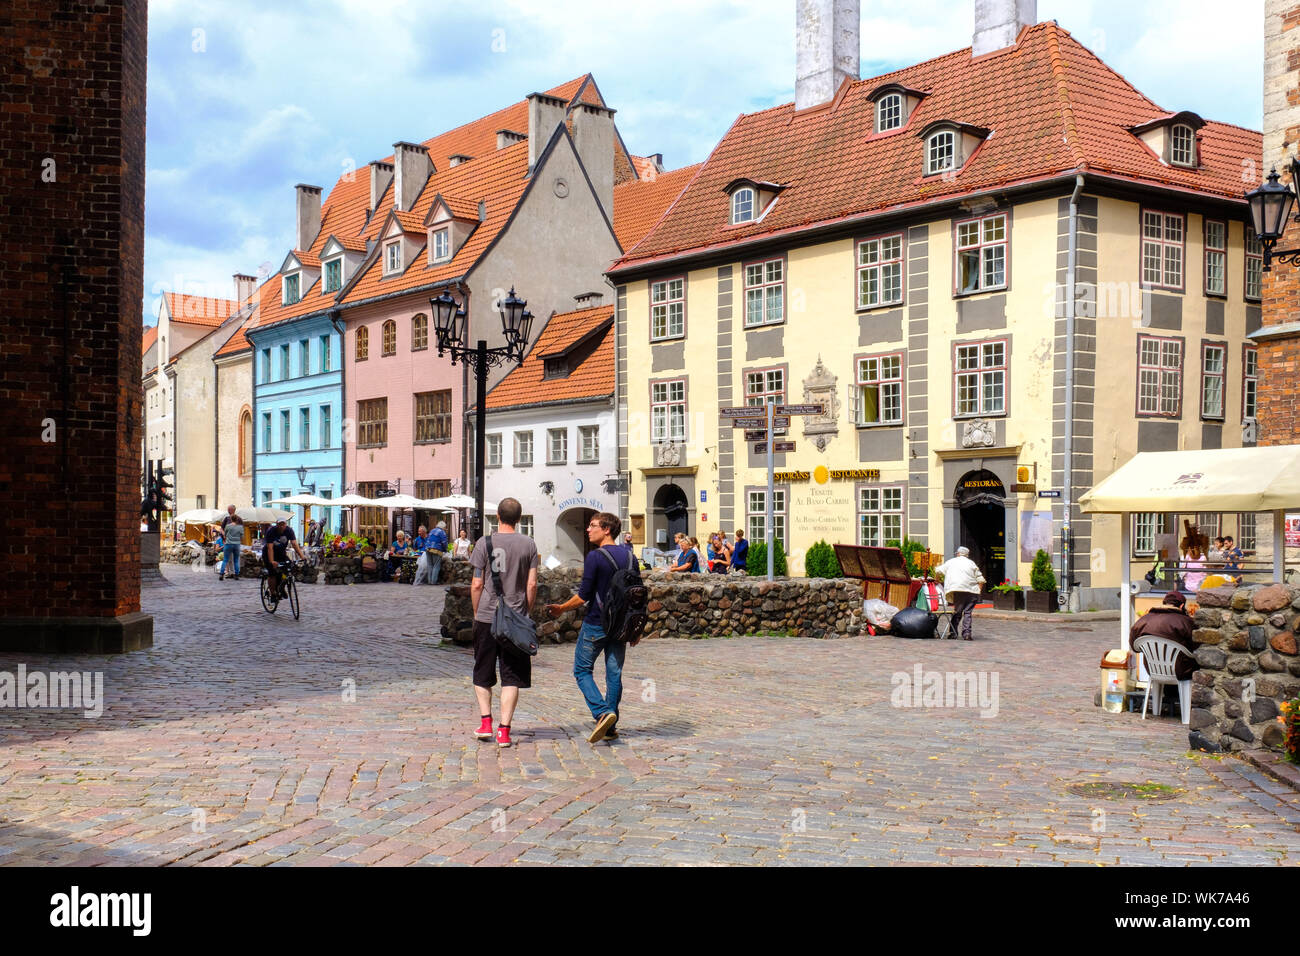 Latvia: Riga. Pedestrians and tourists in the cobbled streets of the historic centre with its traditional houses and colourful facades Stock Photo